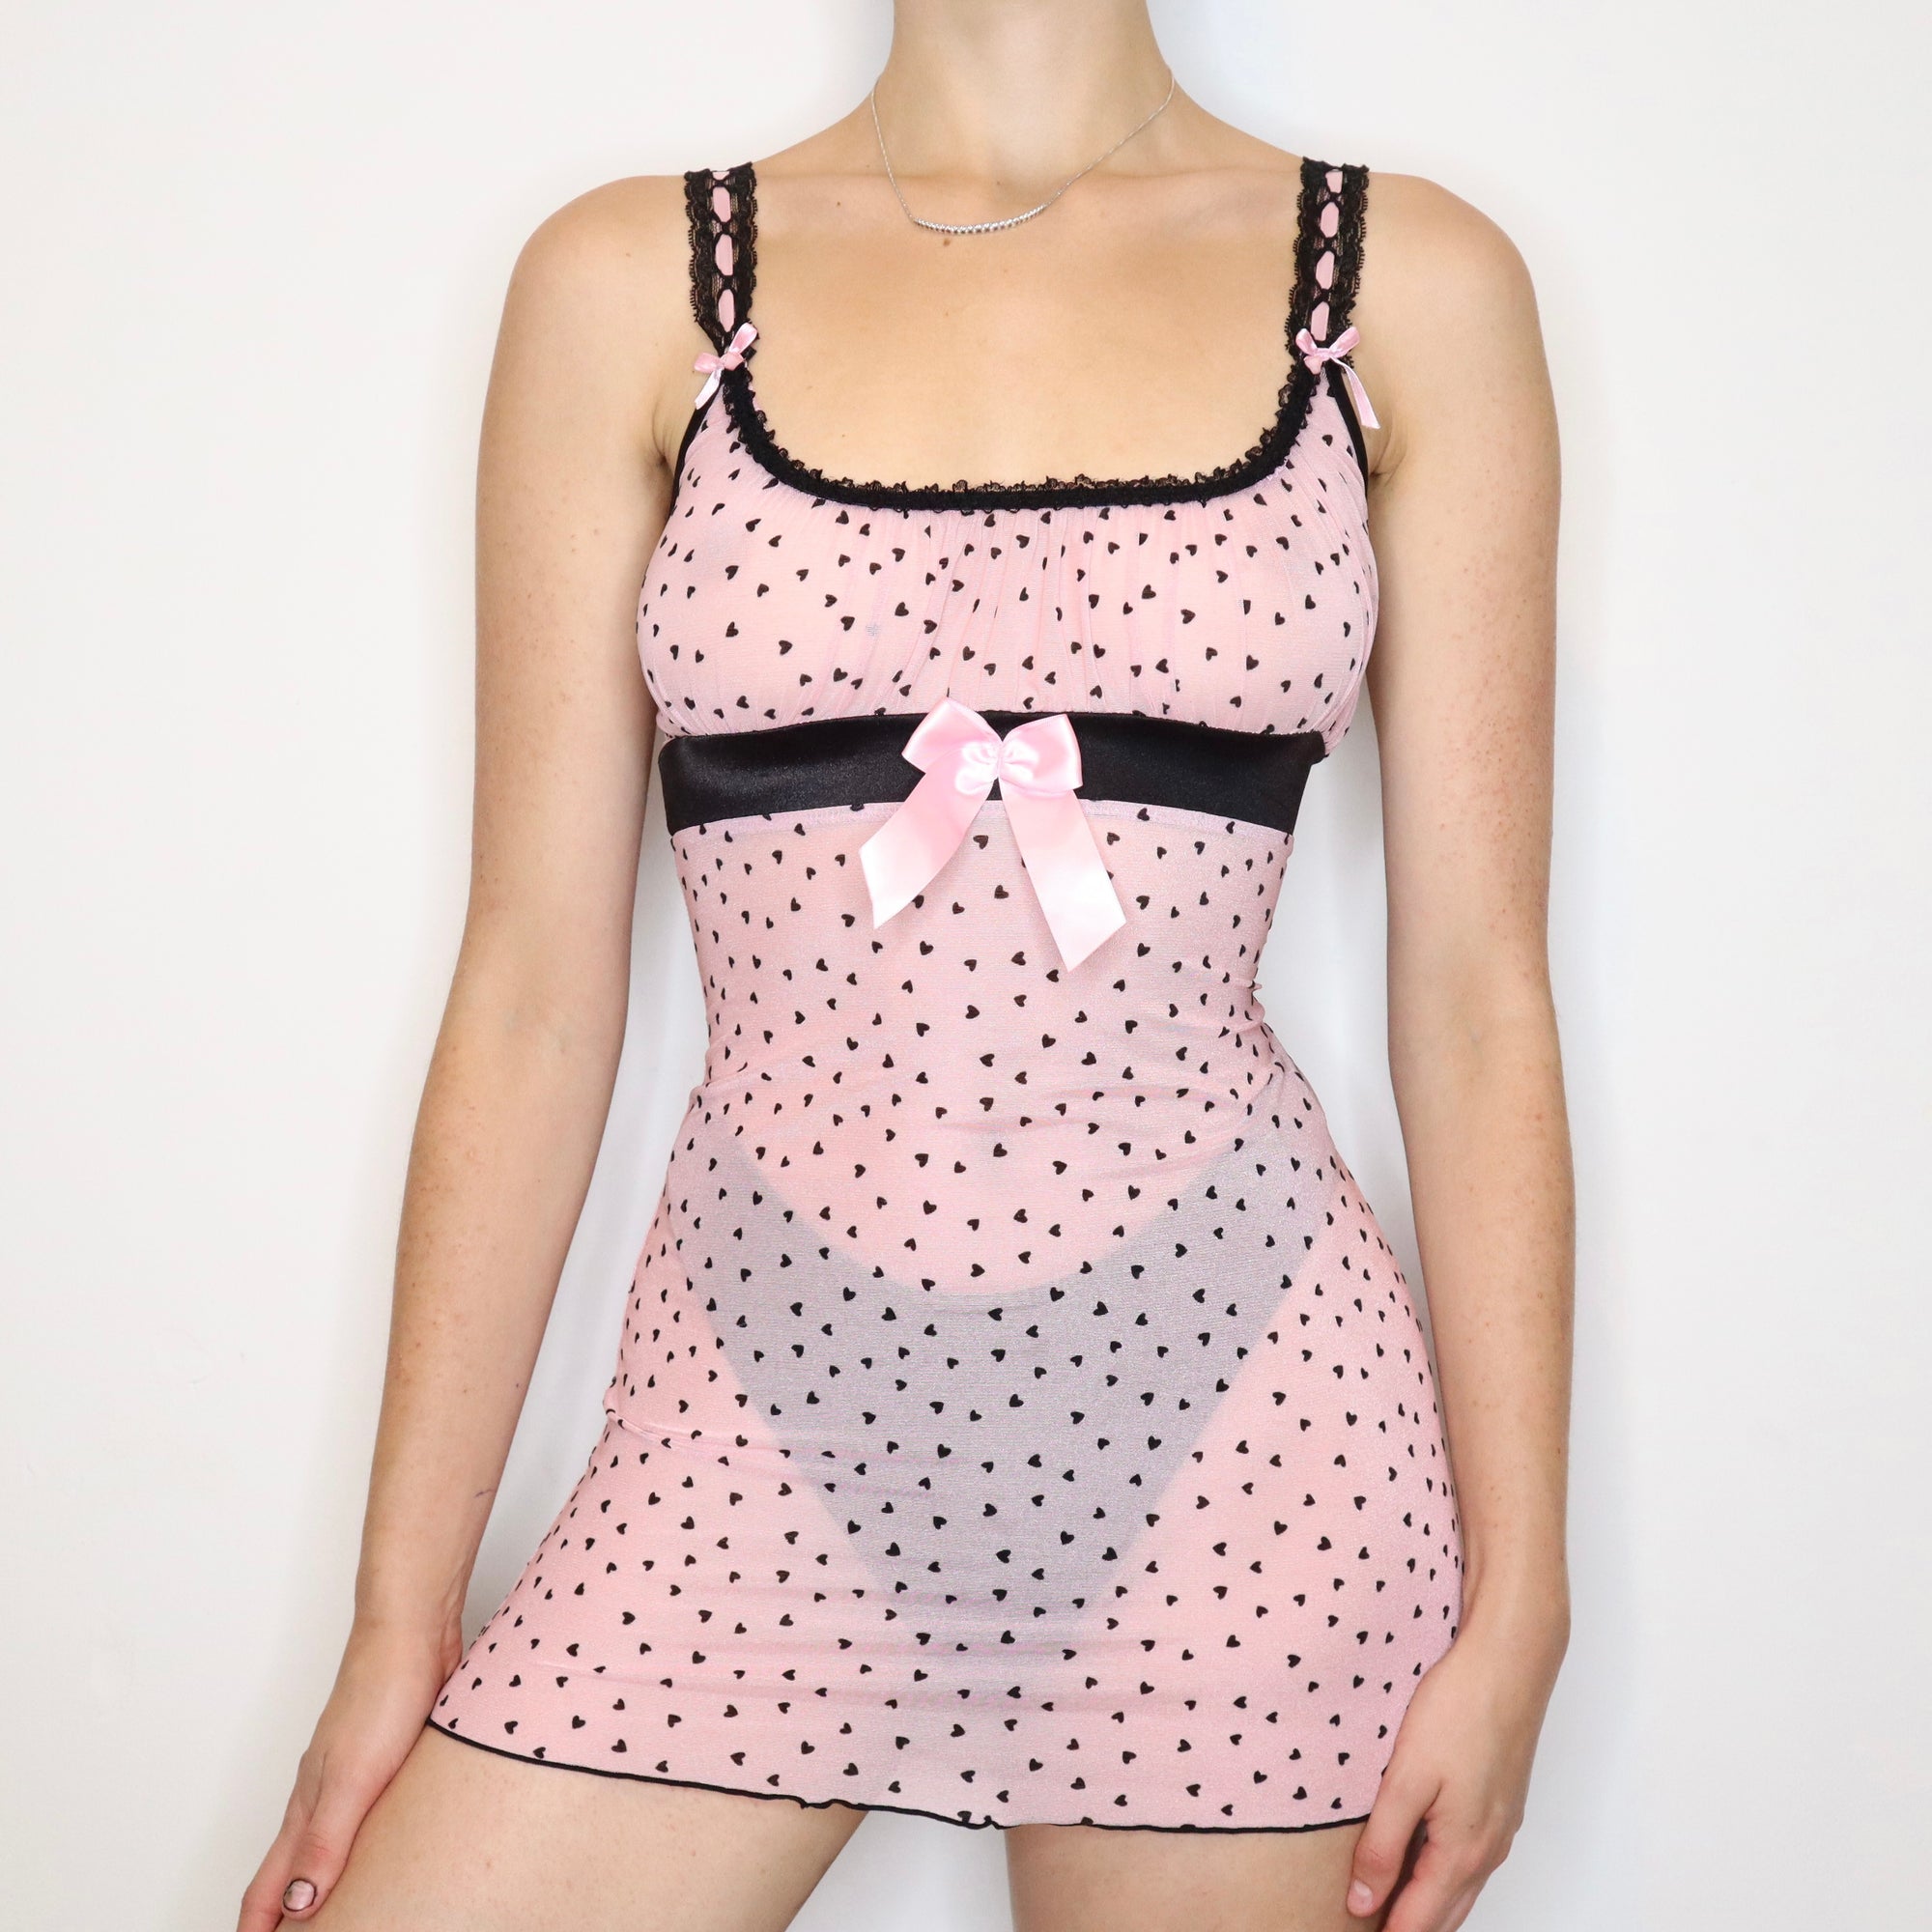 Vintage Early 2000s Baby Pink Hearts Milkmaid Slip Dress